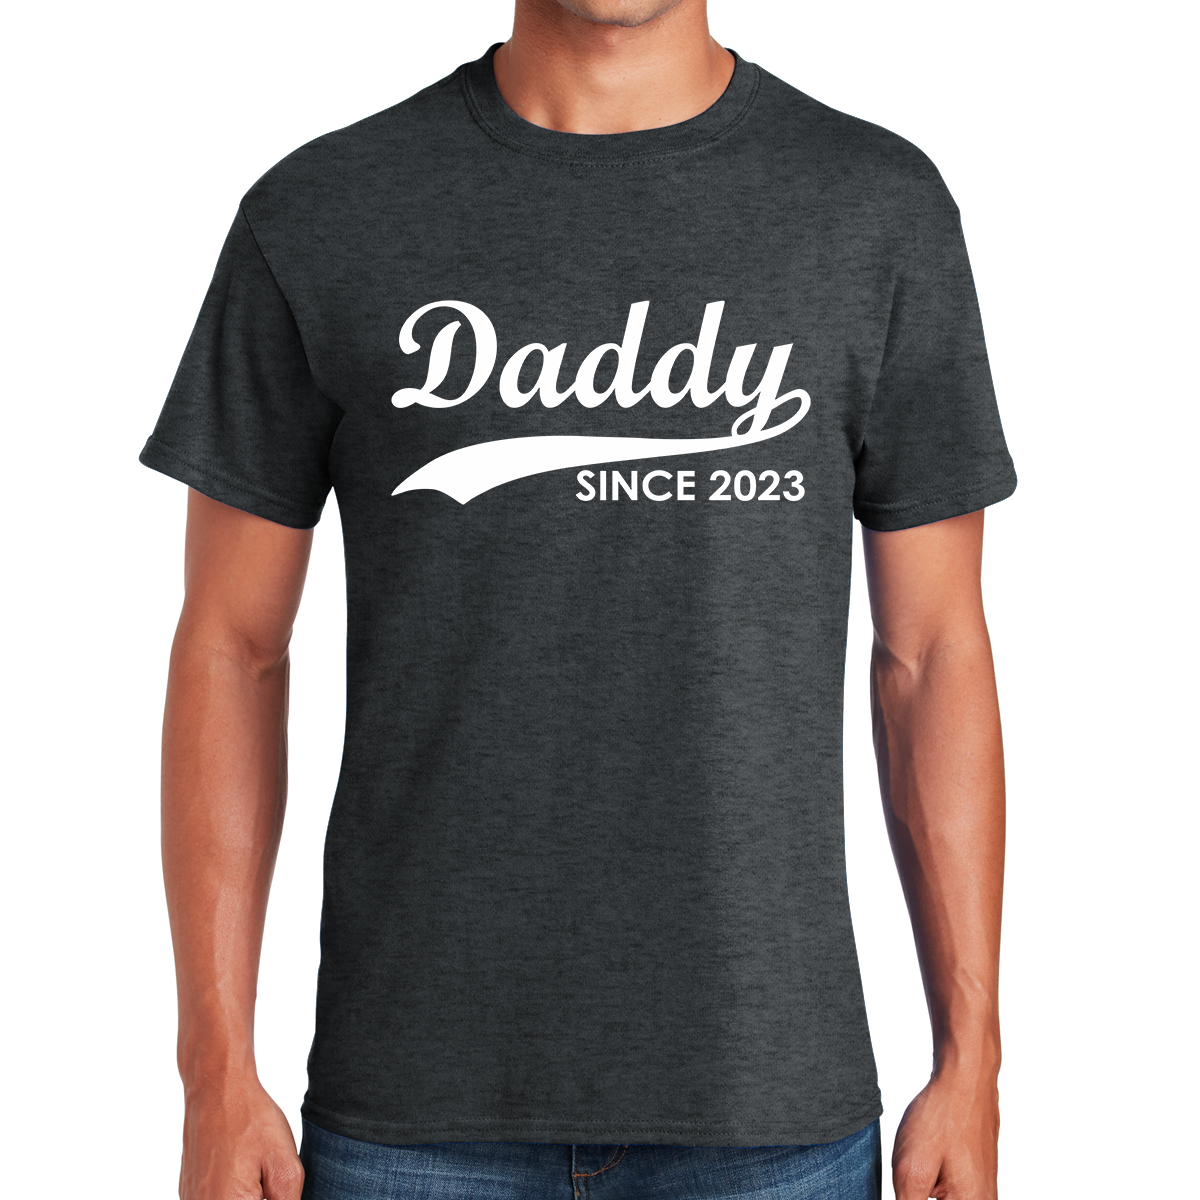 Daddy Since 2023 - Awesome Dad T-shirt